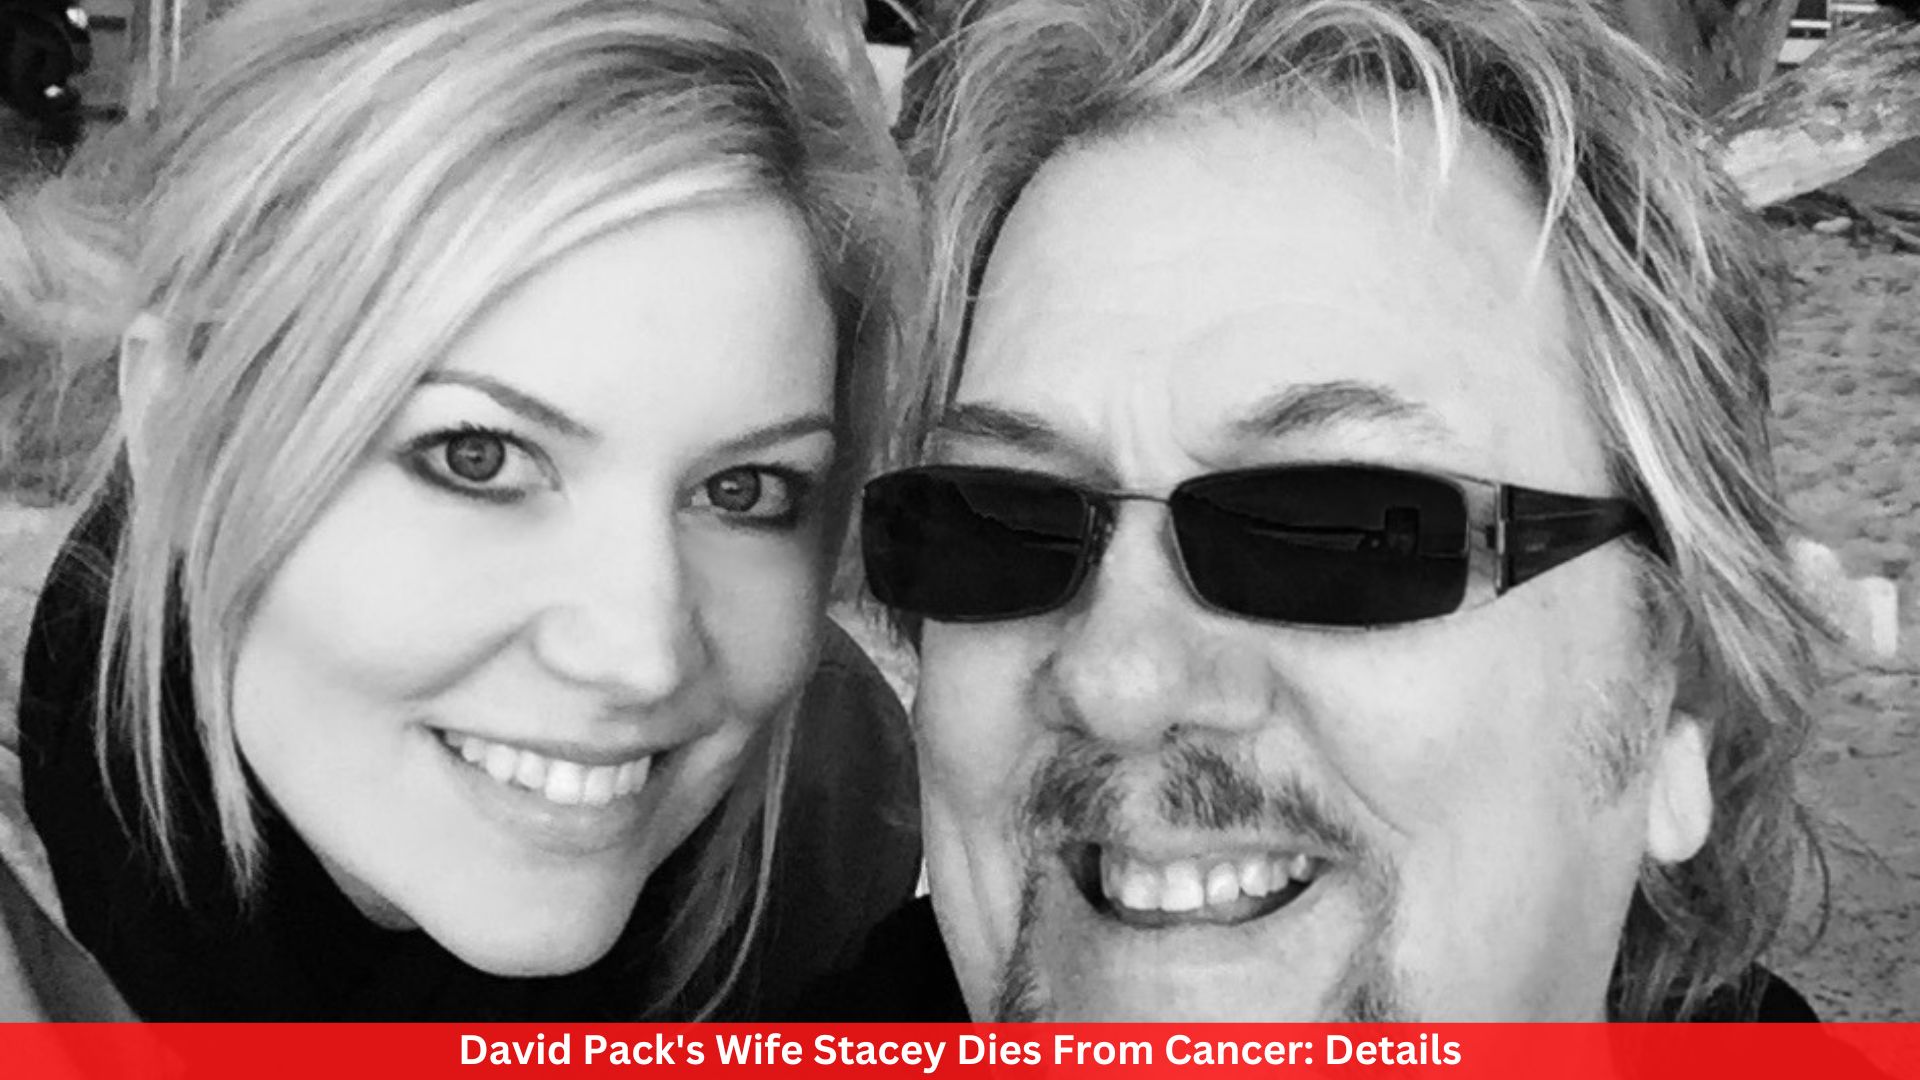 David Pack's Wife Stacey Dies From Cancer: Details